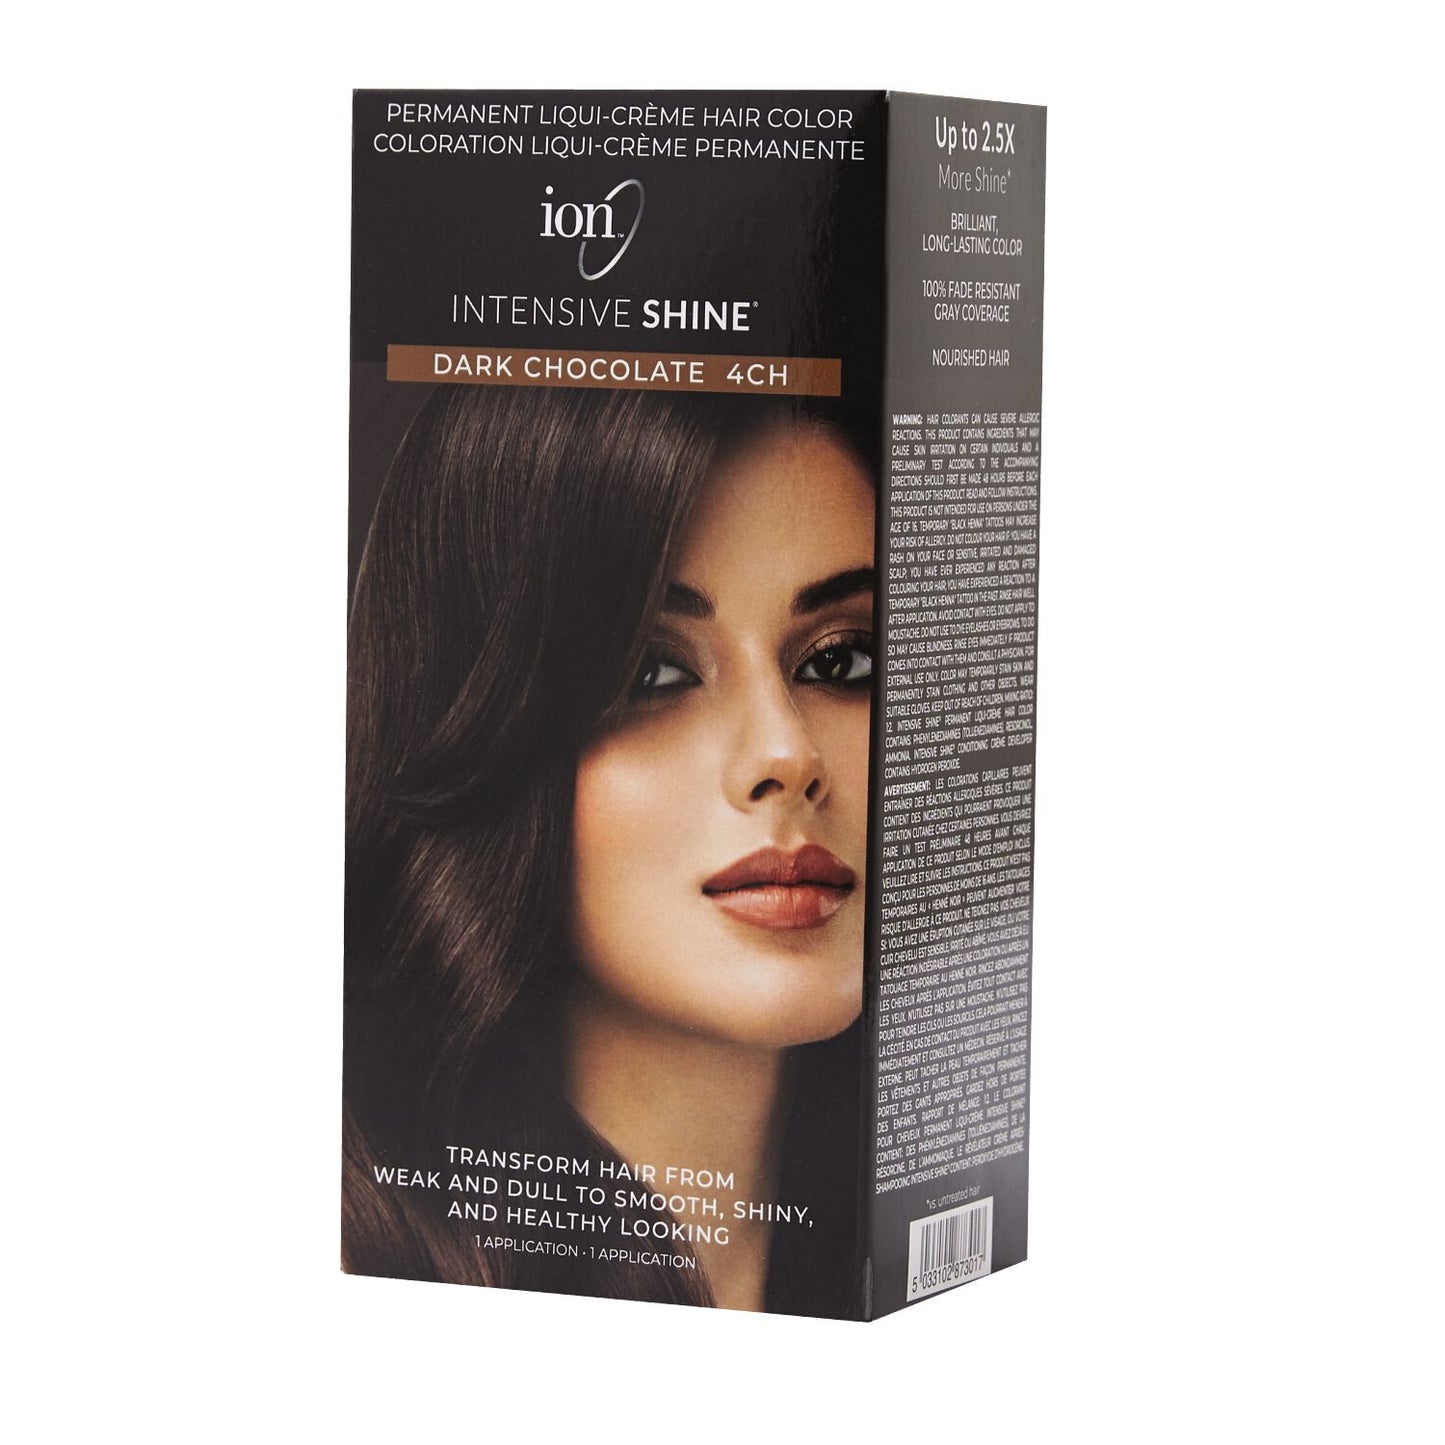 Intensive Shine  by   ion Intensive Shine Hair Color Kit Dark Chocolate 4CH